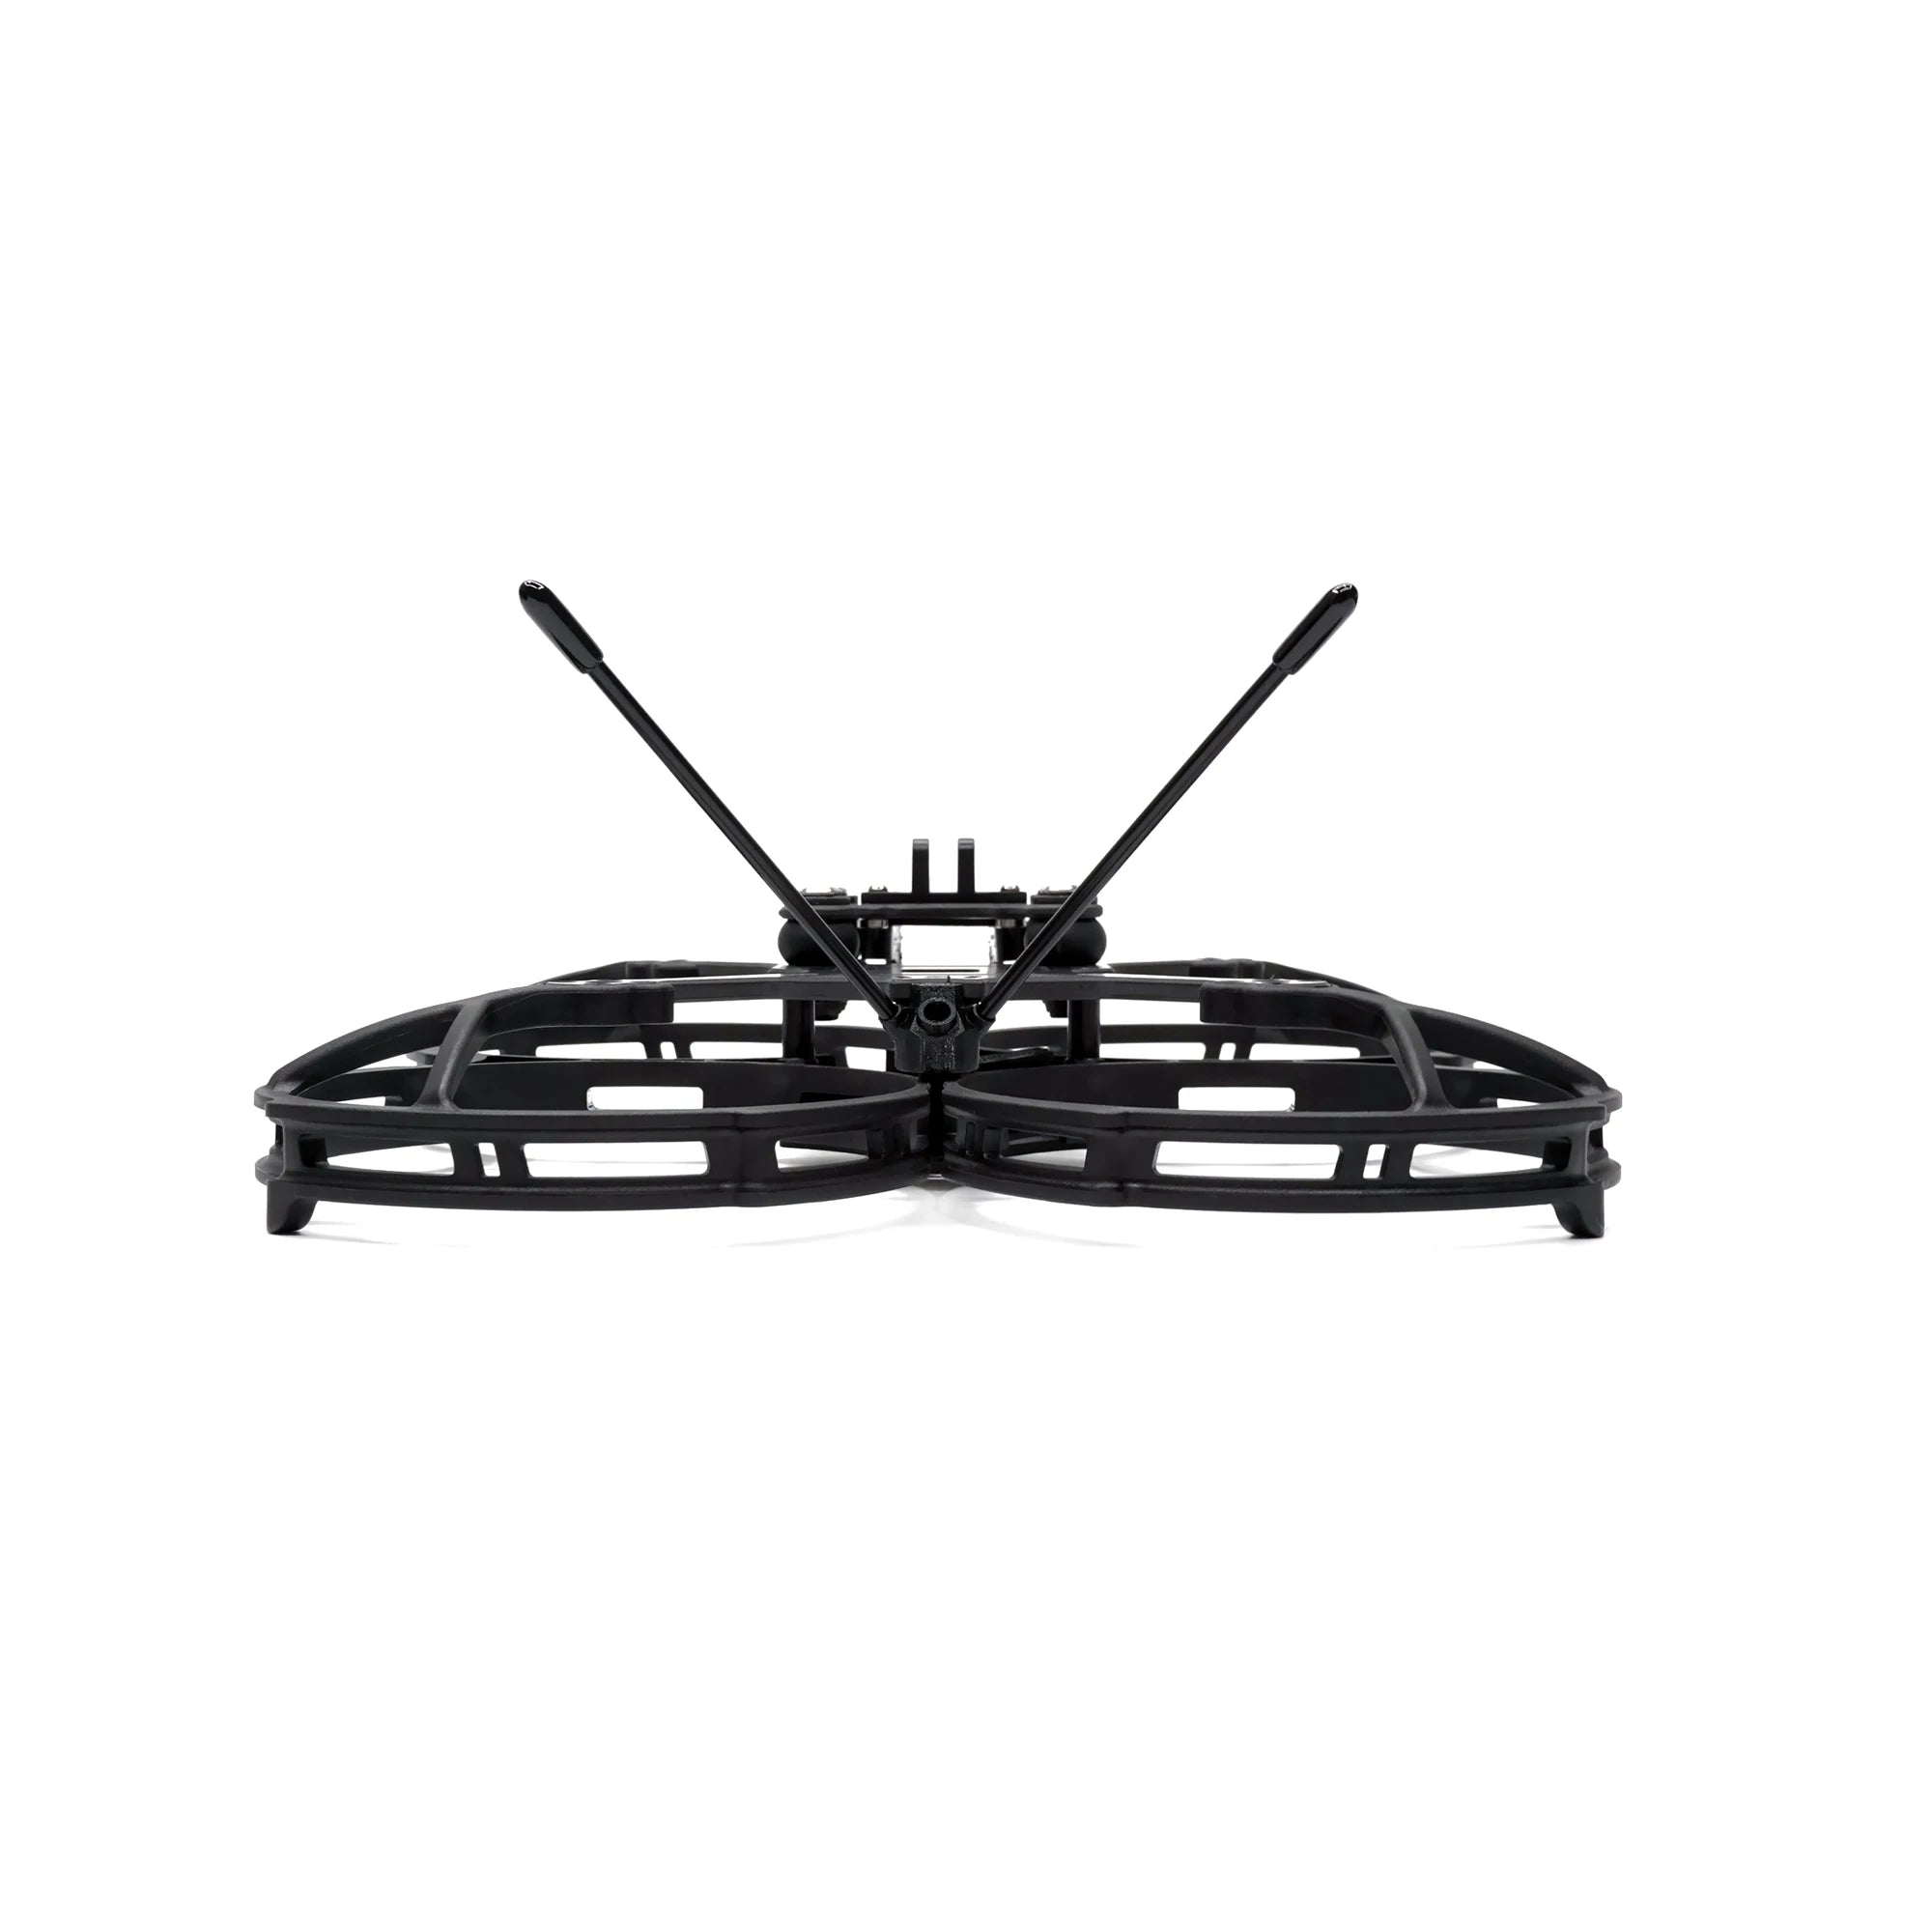 GEPRC GEP-CL35 Frame Kit Suitable For Cinelog35 Series Drone